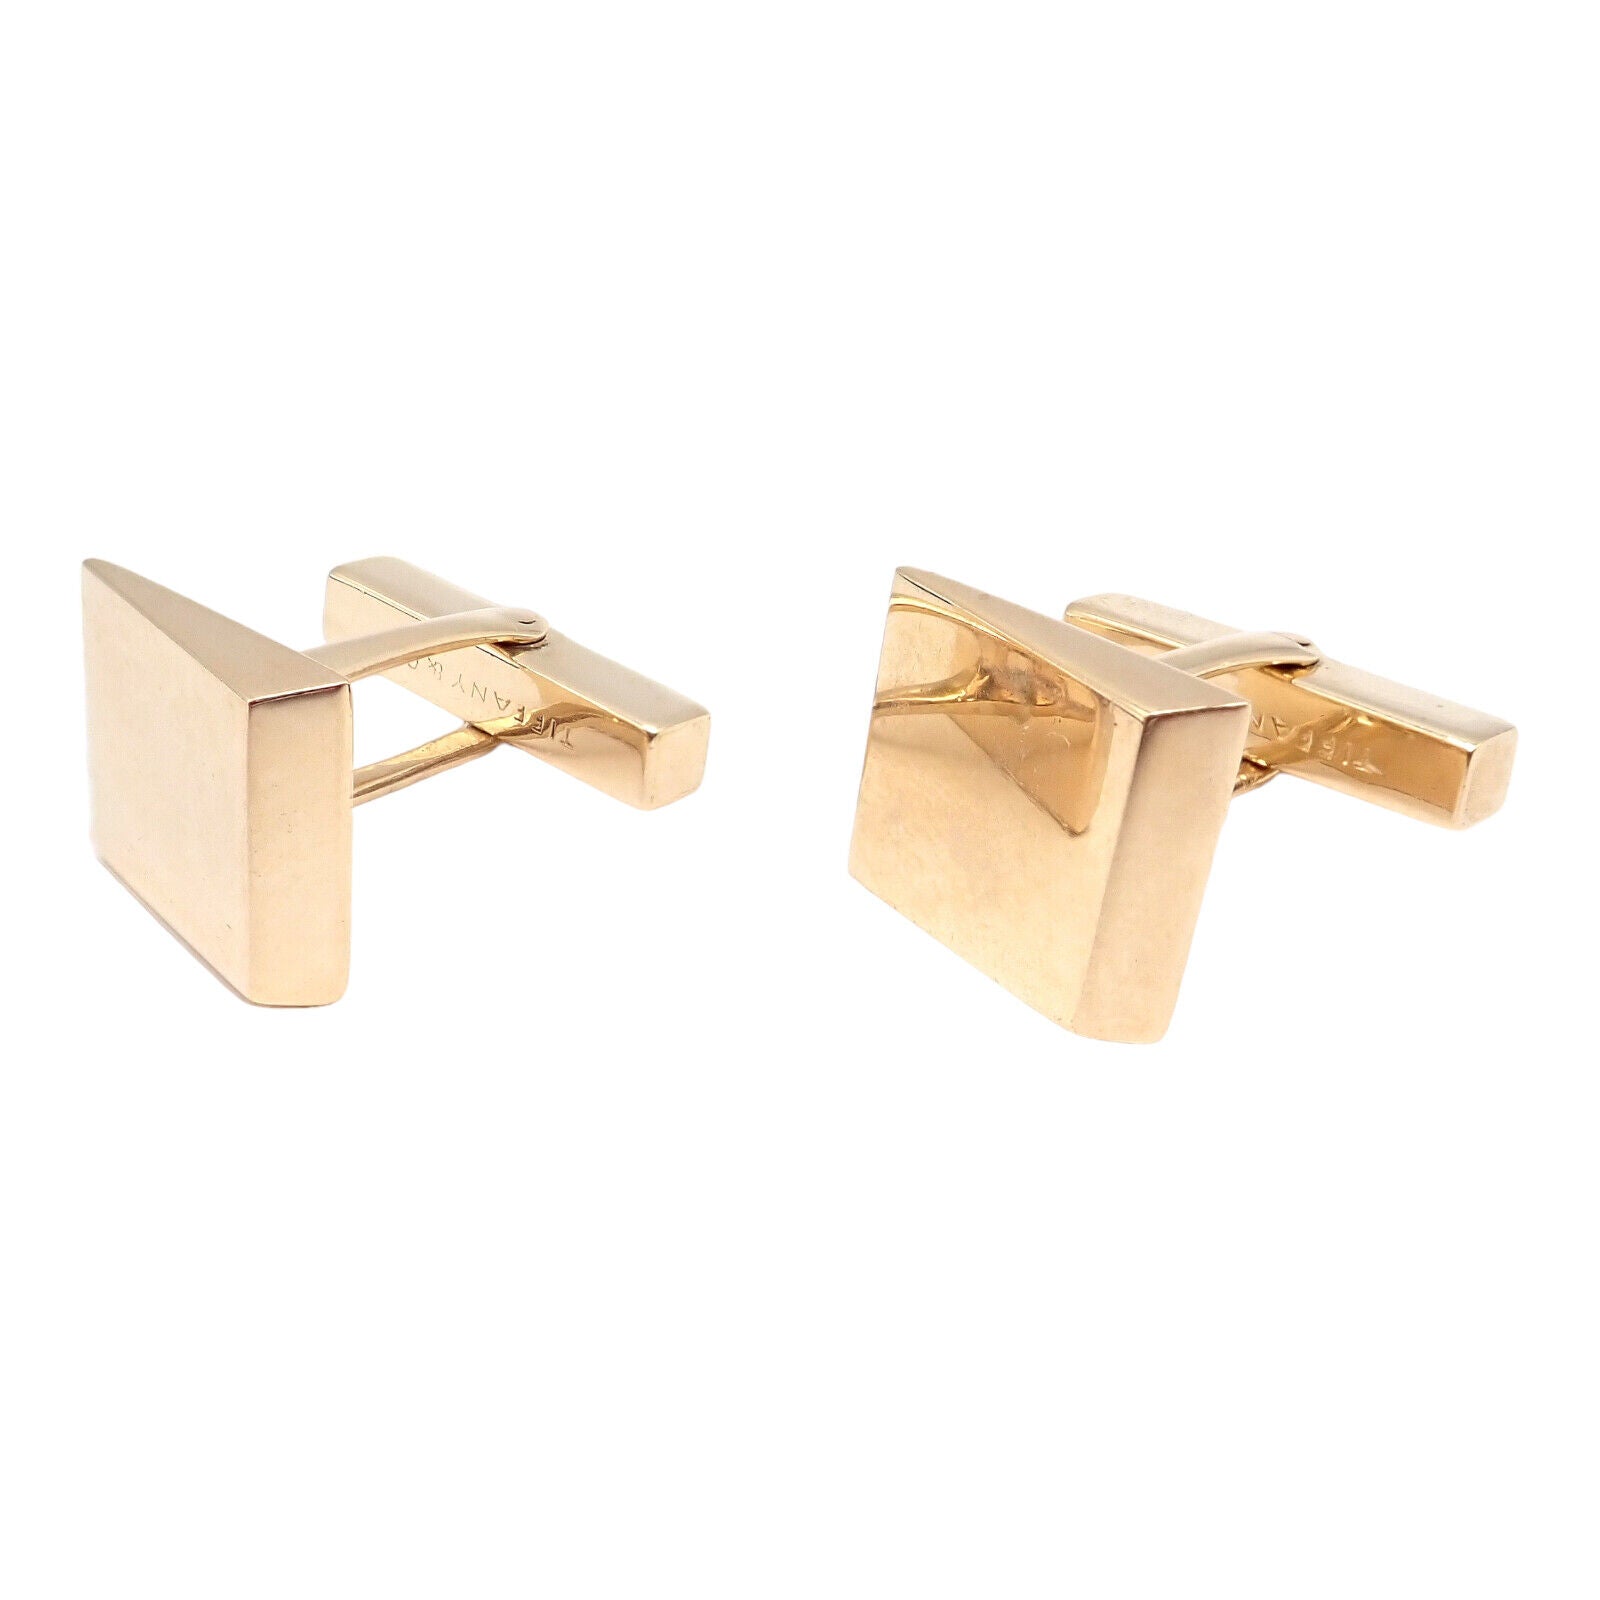 Vintage Authentic! Tiffany & Co 14k Yellow Gold Square Angled Cufflink